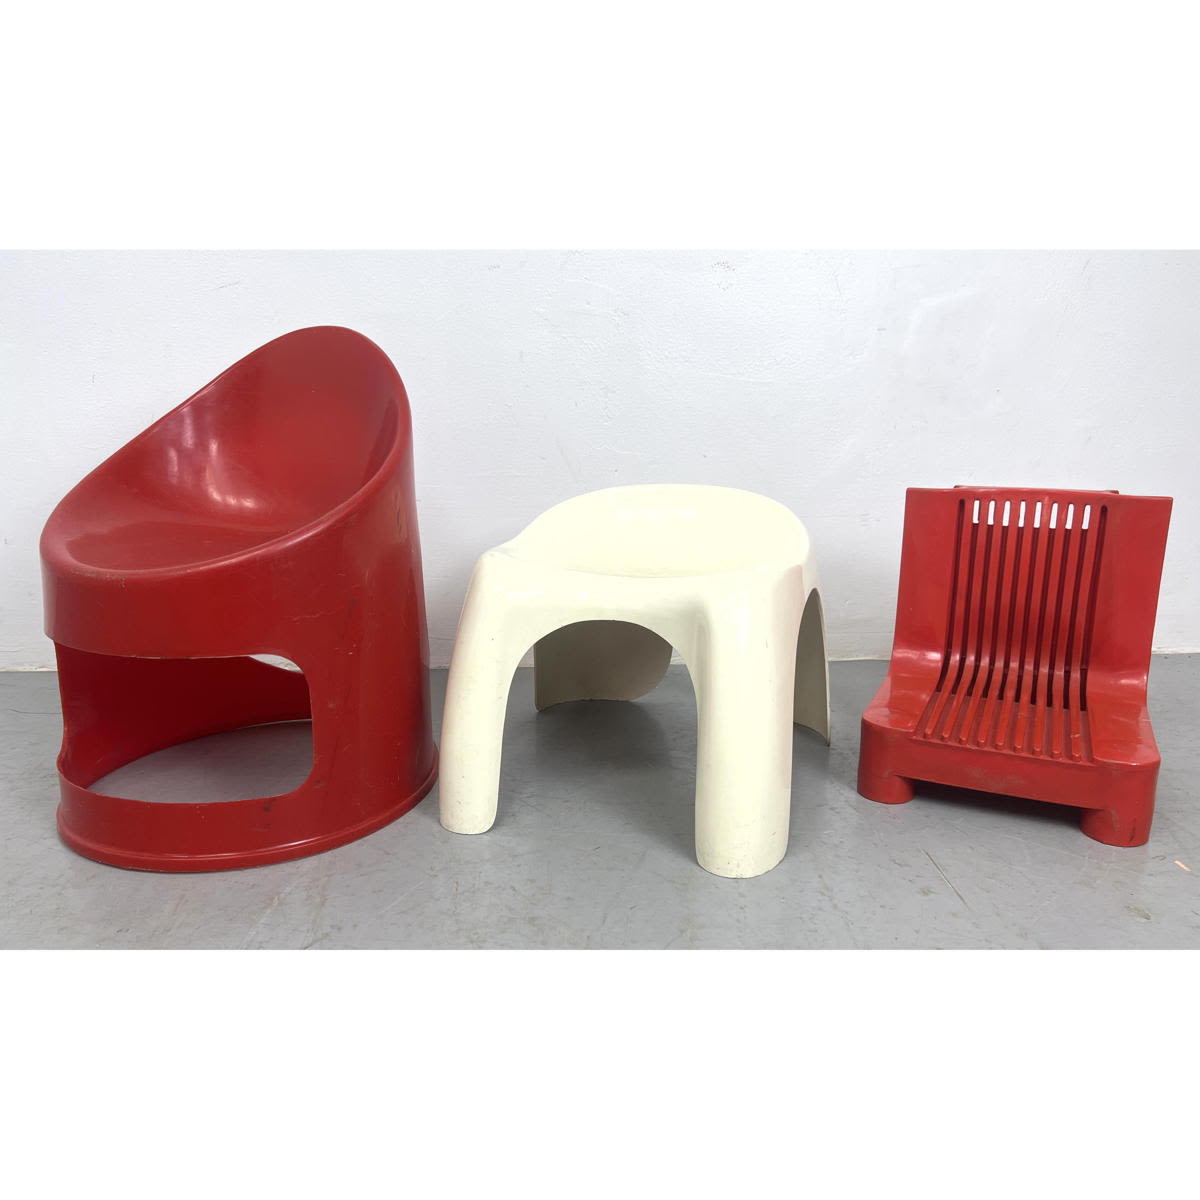 3 plastic child's chairs. Molded